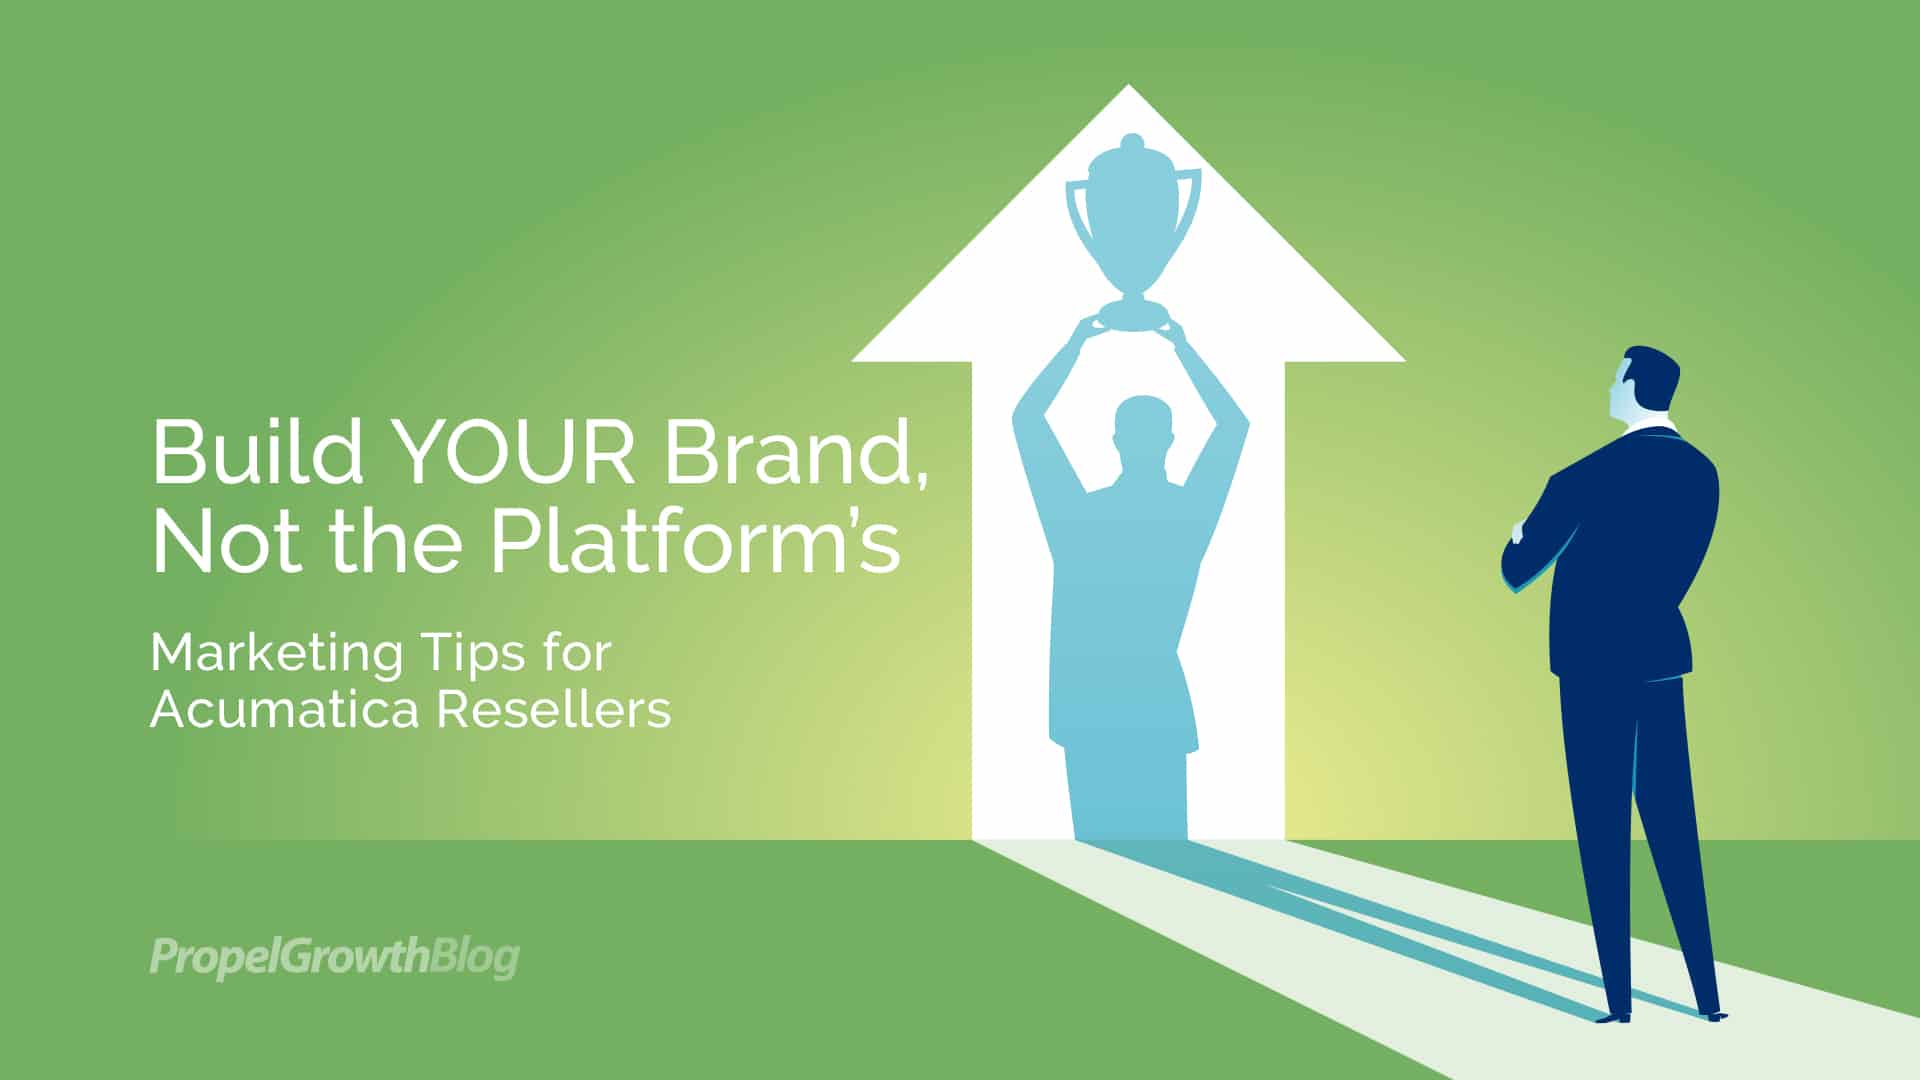 Build YOUR Brand, Not the Platform's - Marketing Tips for Acumatica Resellers